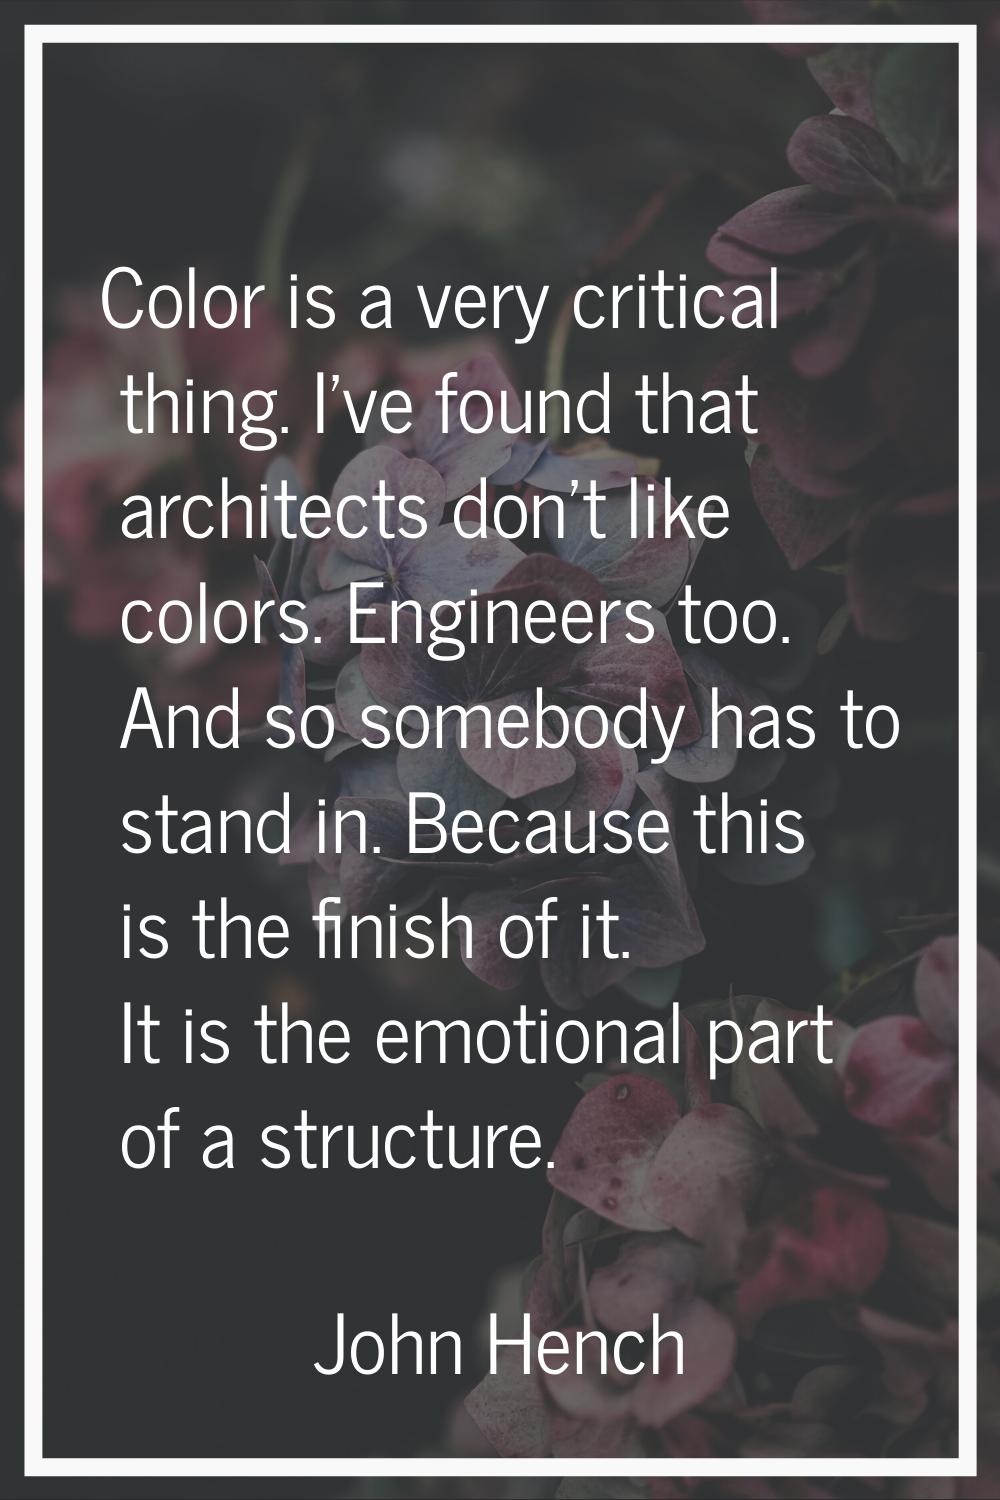 Color is a very critical thing. I've found that architects don't like colors. Engineers too. And so